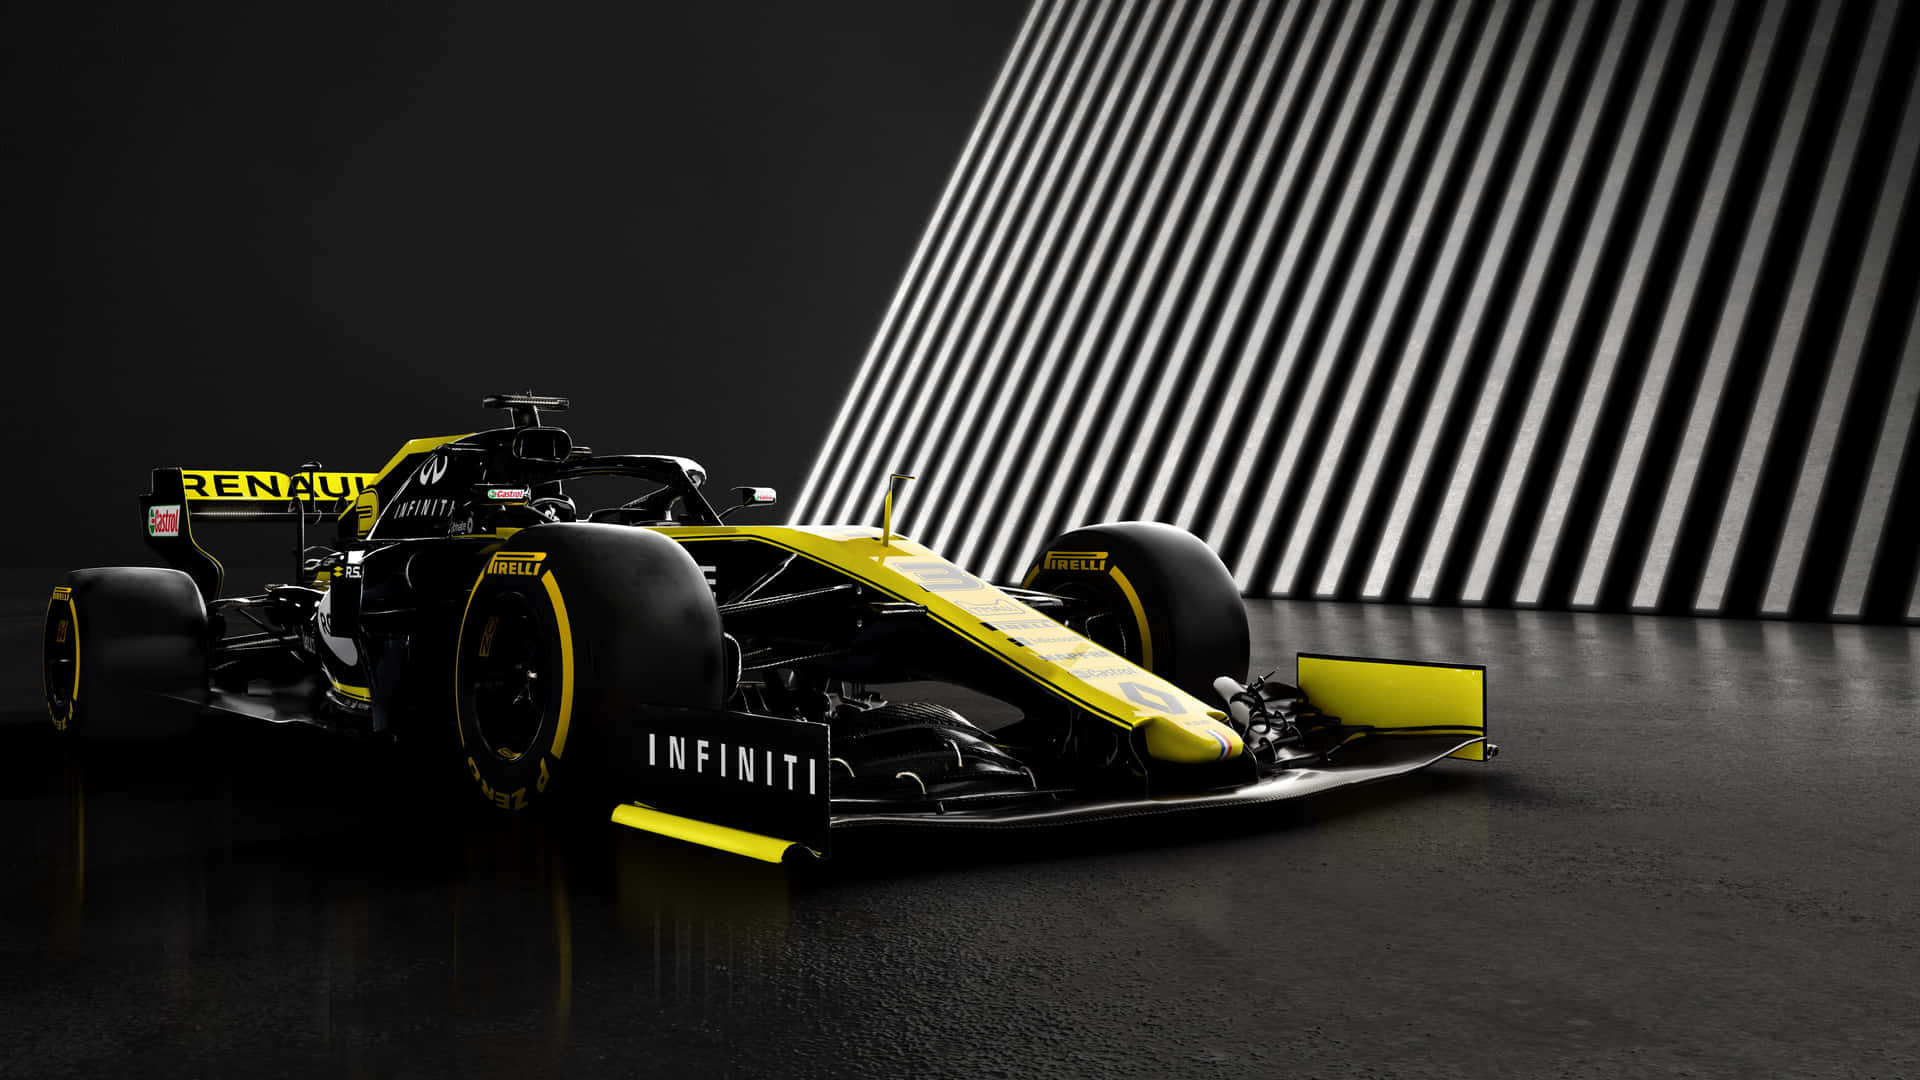 A Black And Yellow Racing Car In A Dark Room